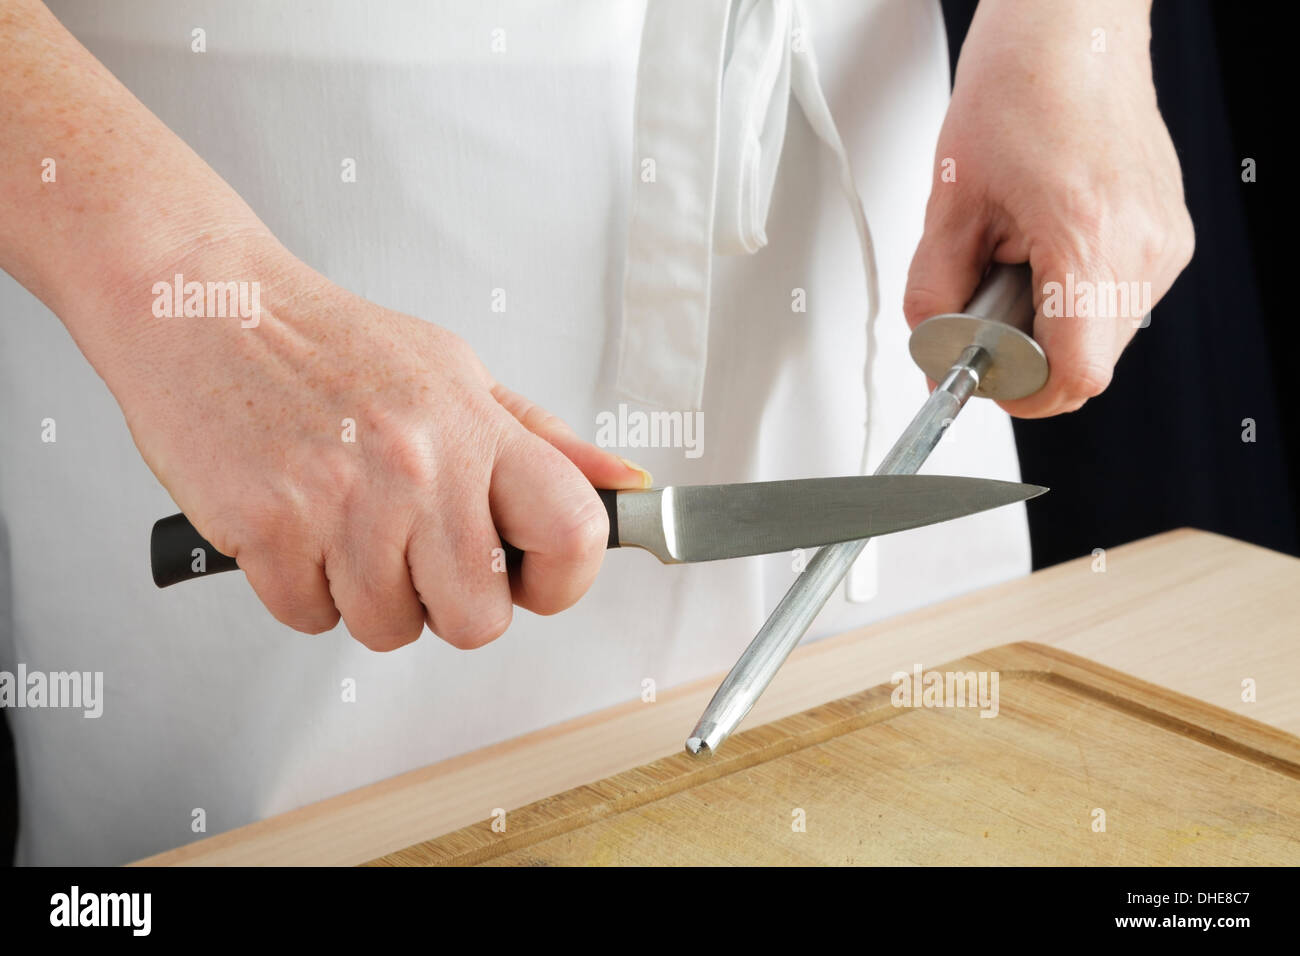 Closeup Of Male Chef Hands Sharpen A Big Chefs Knife Stock Photo